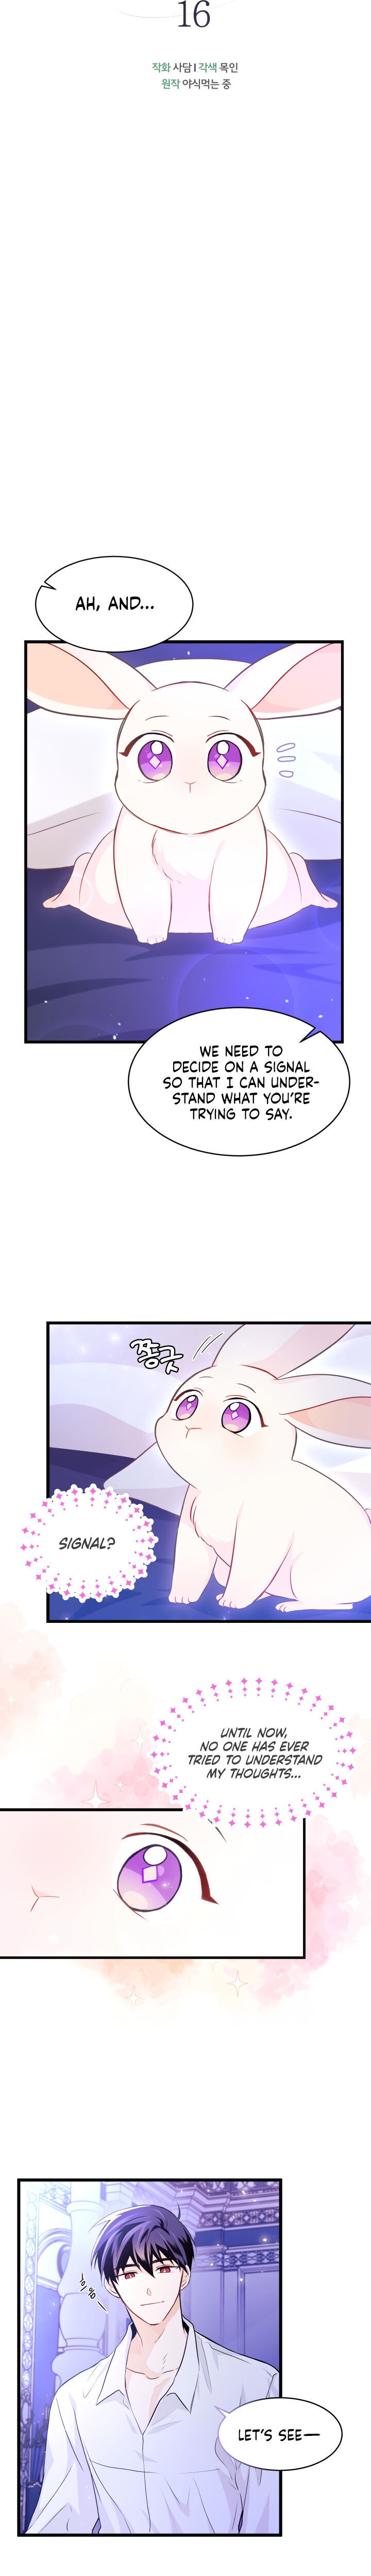 A Symbiotic Relationship Between A Rabbit And A Black Panther - Chapter 16 Page 3